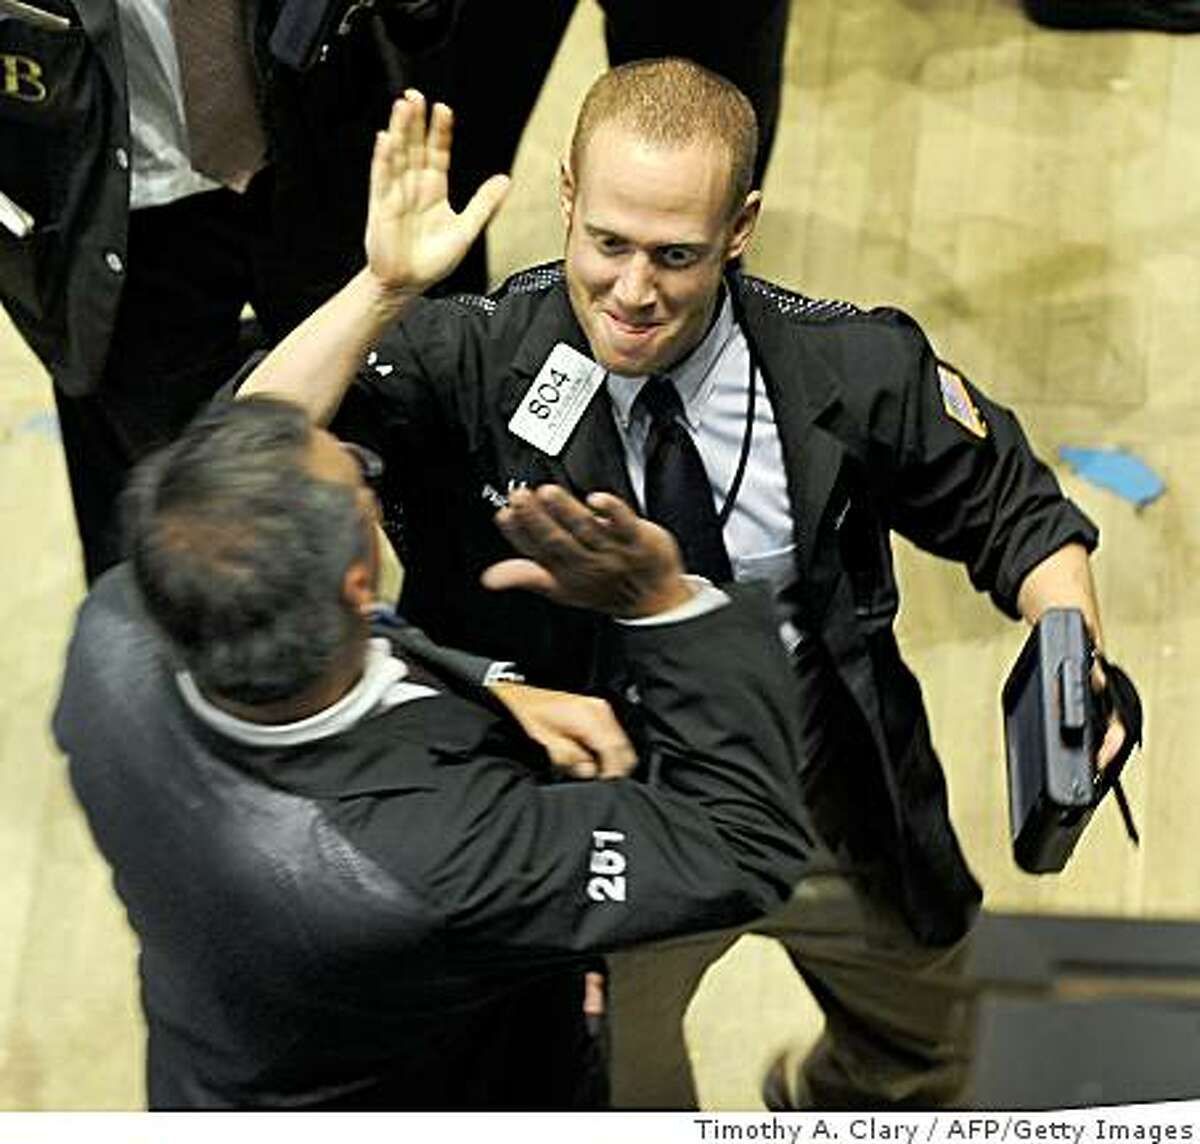 Traders celebrate on the floor of the New York Stock exchange on October 13, 2008 in New York City at the closing bell. U.S. stocks surged more than 11 percent, with the Dow index registering its biggest point gain ever as investors cheered governments' action plans to combat the global financial crisis.